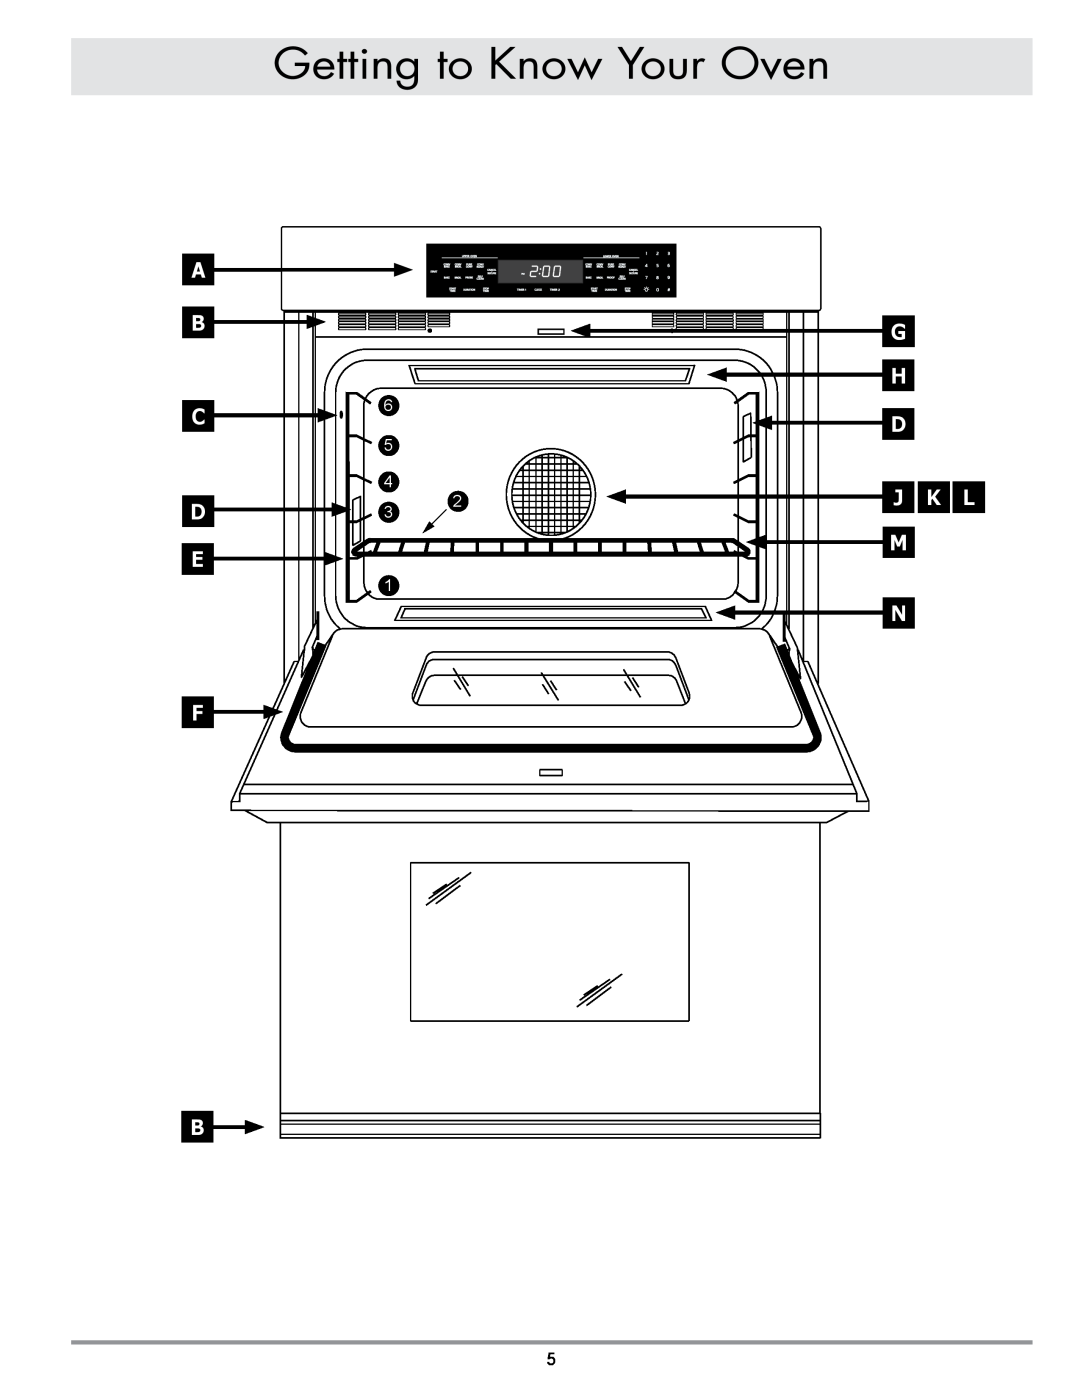 Sears EORD230 manual Getting to Know Your Oven, A B C D E F, G H D J K L M N 